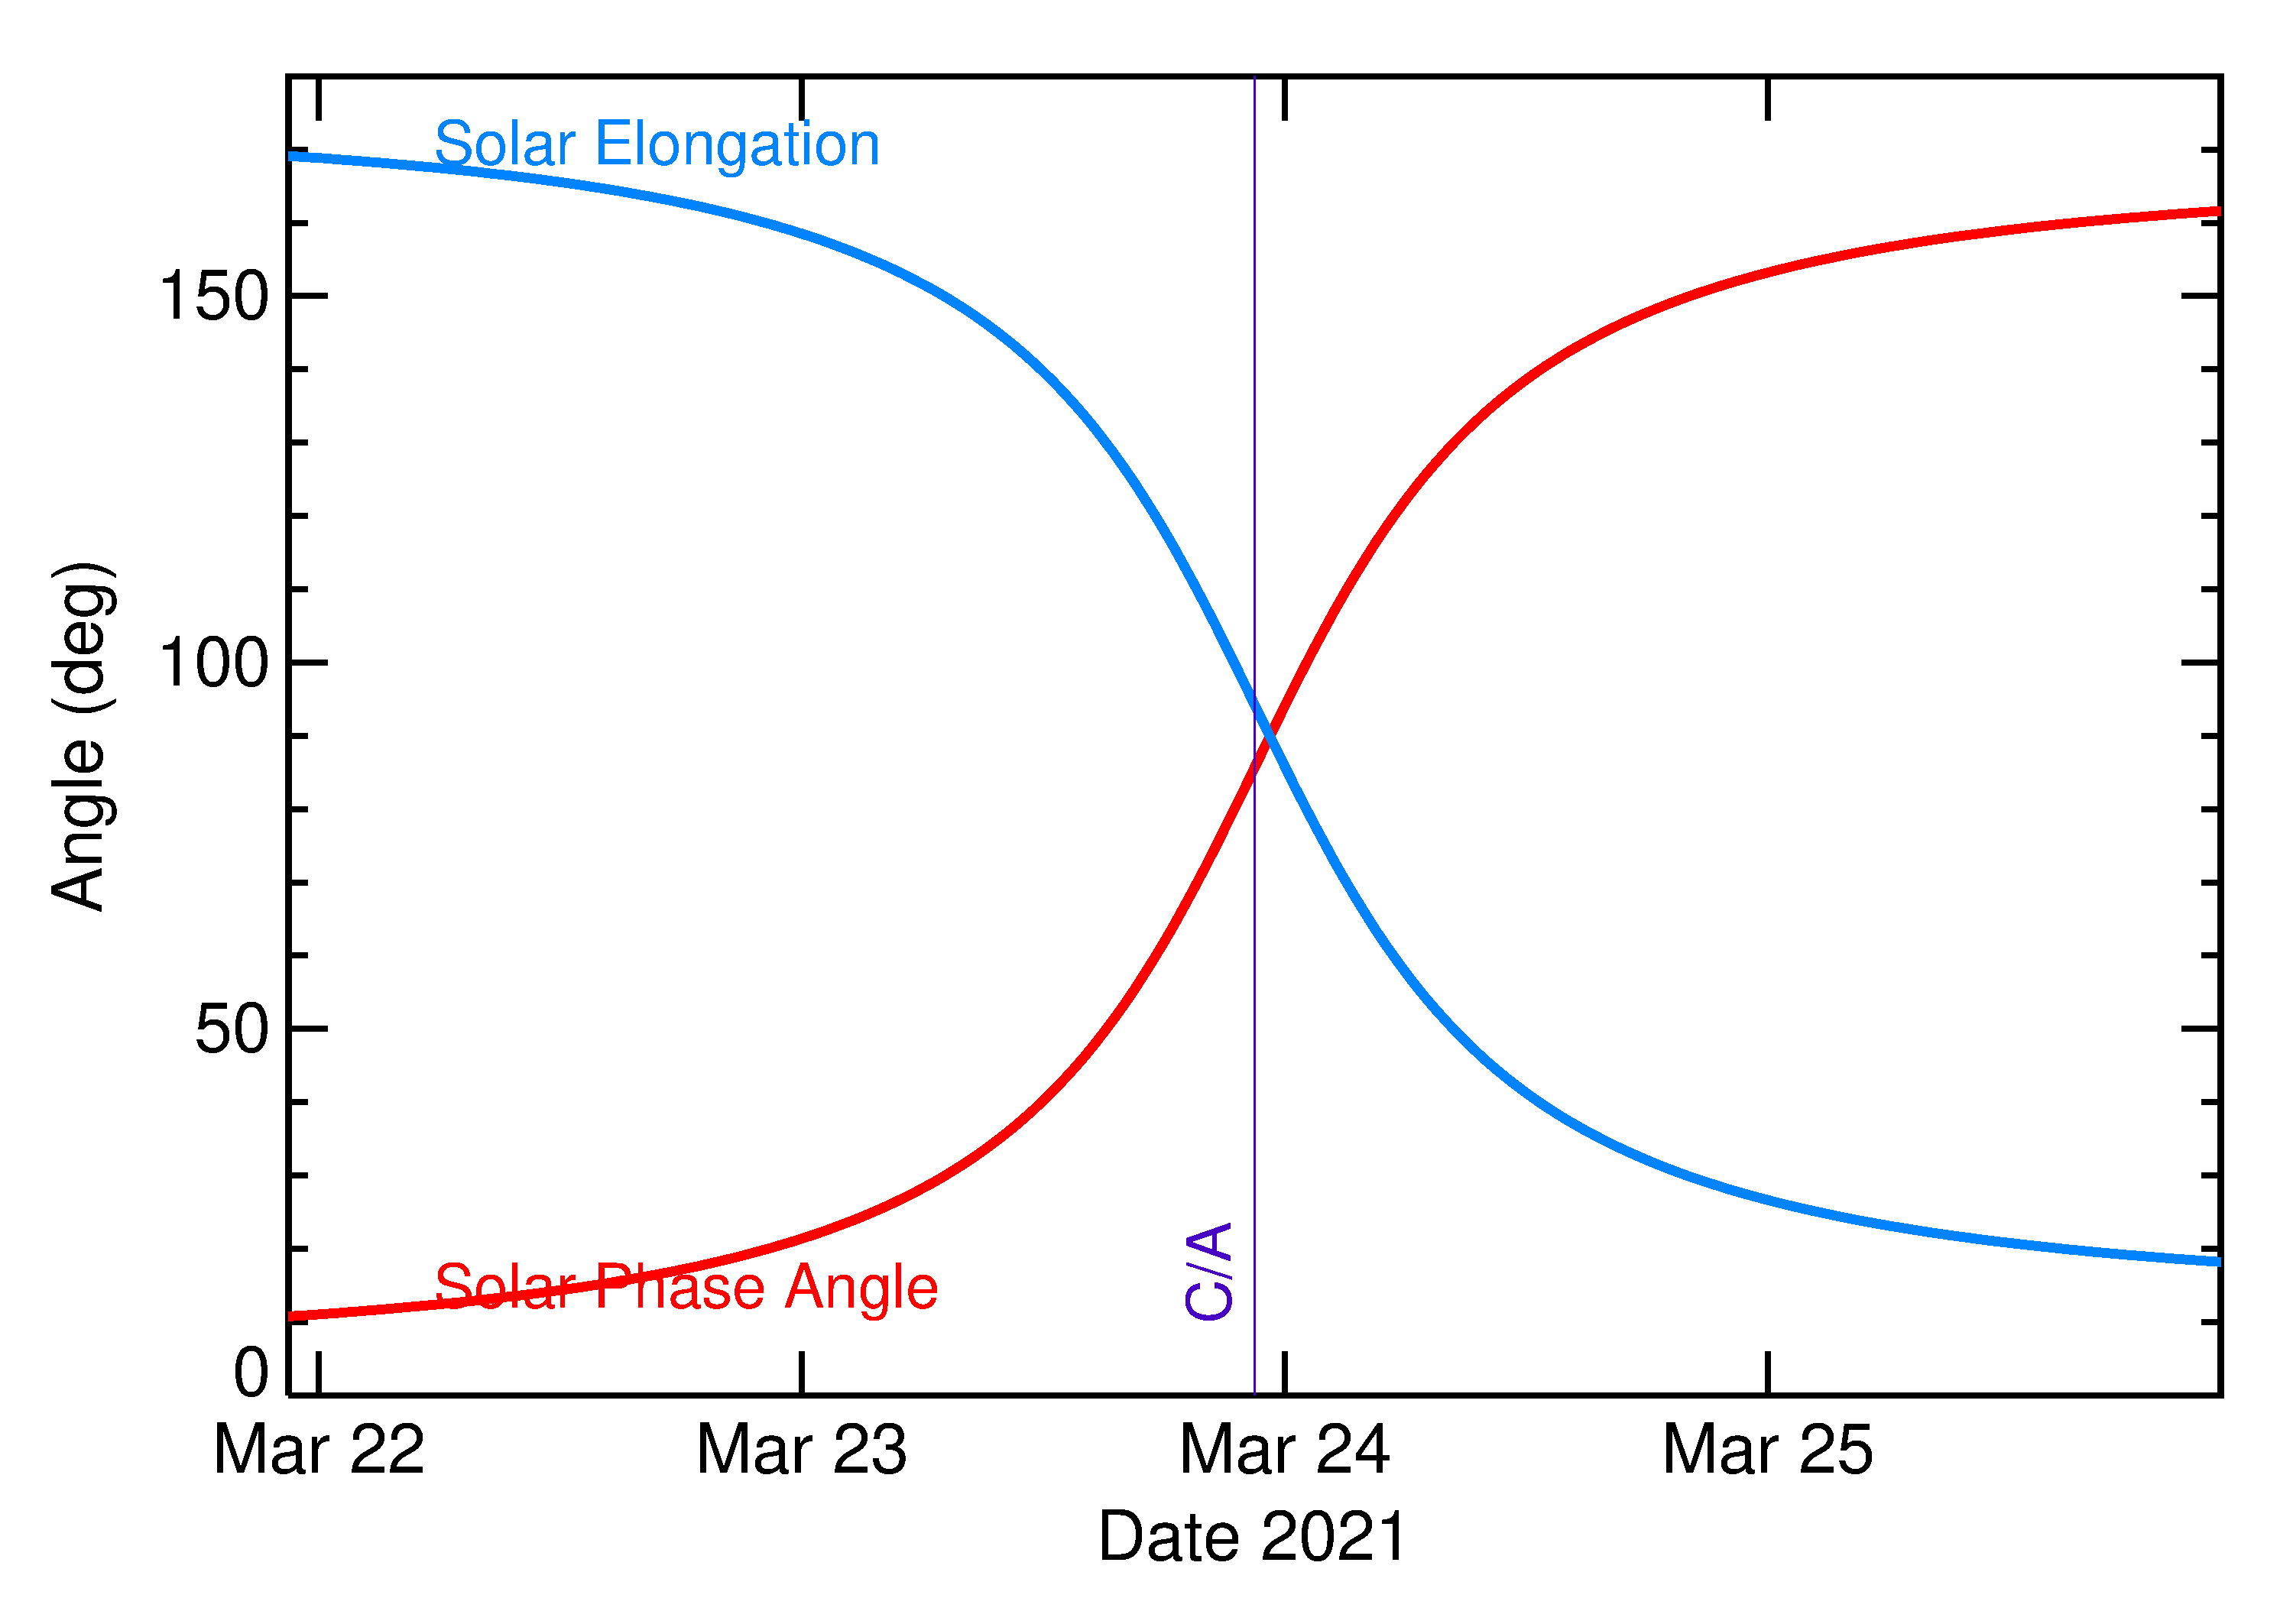 Solar Elongation and Solar Phase Angle of 2021 FP2 in the days around closest approach